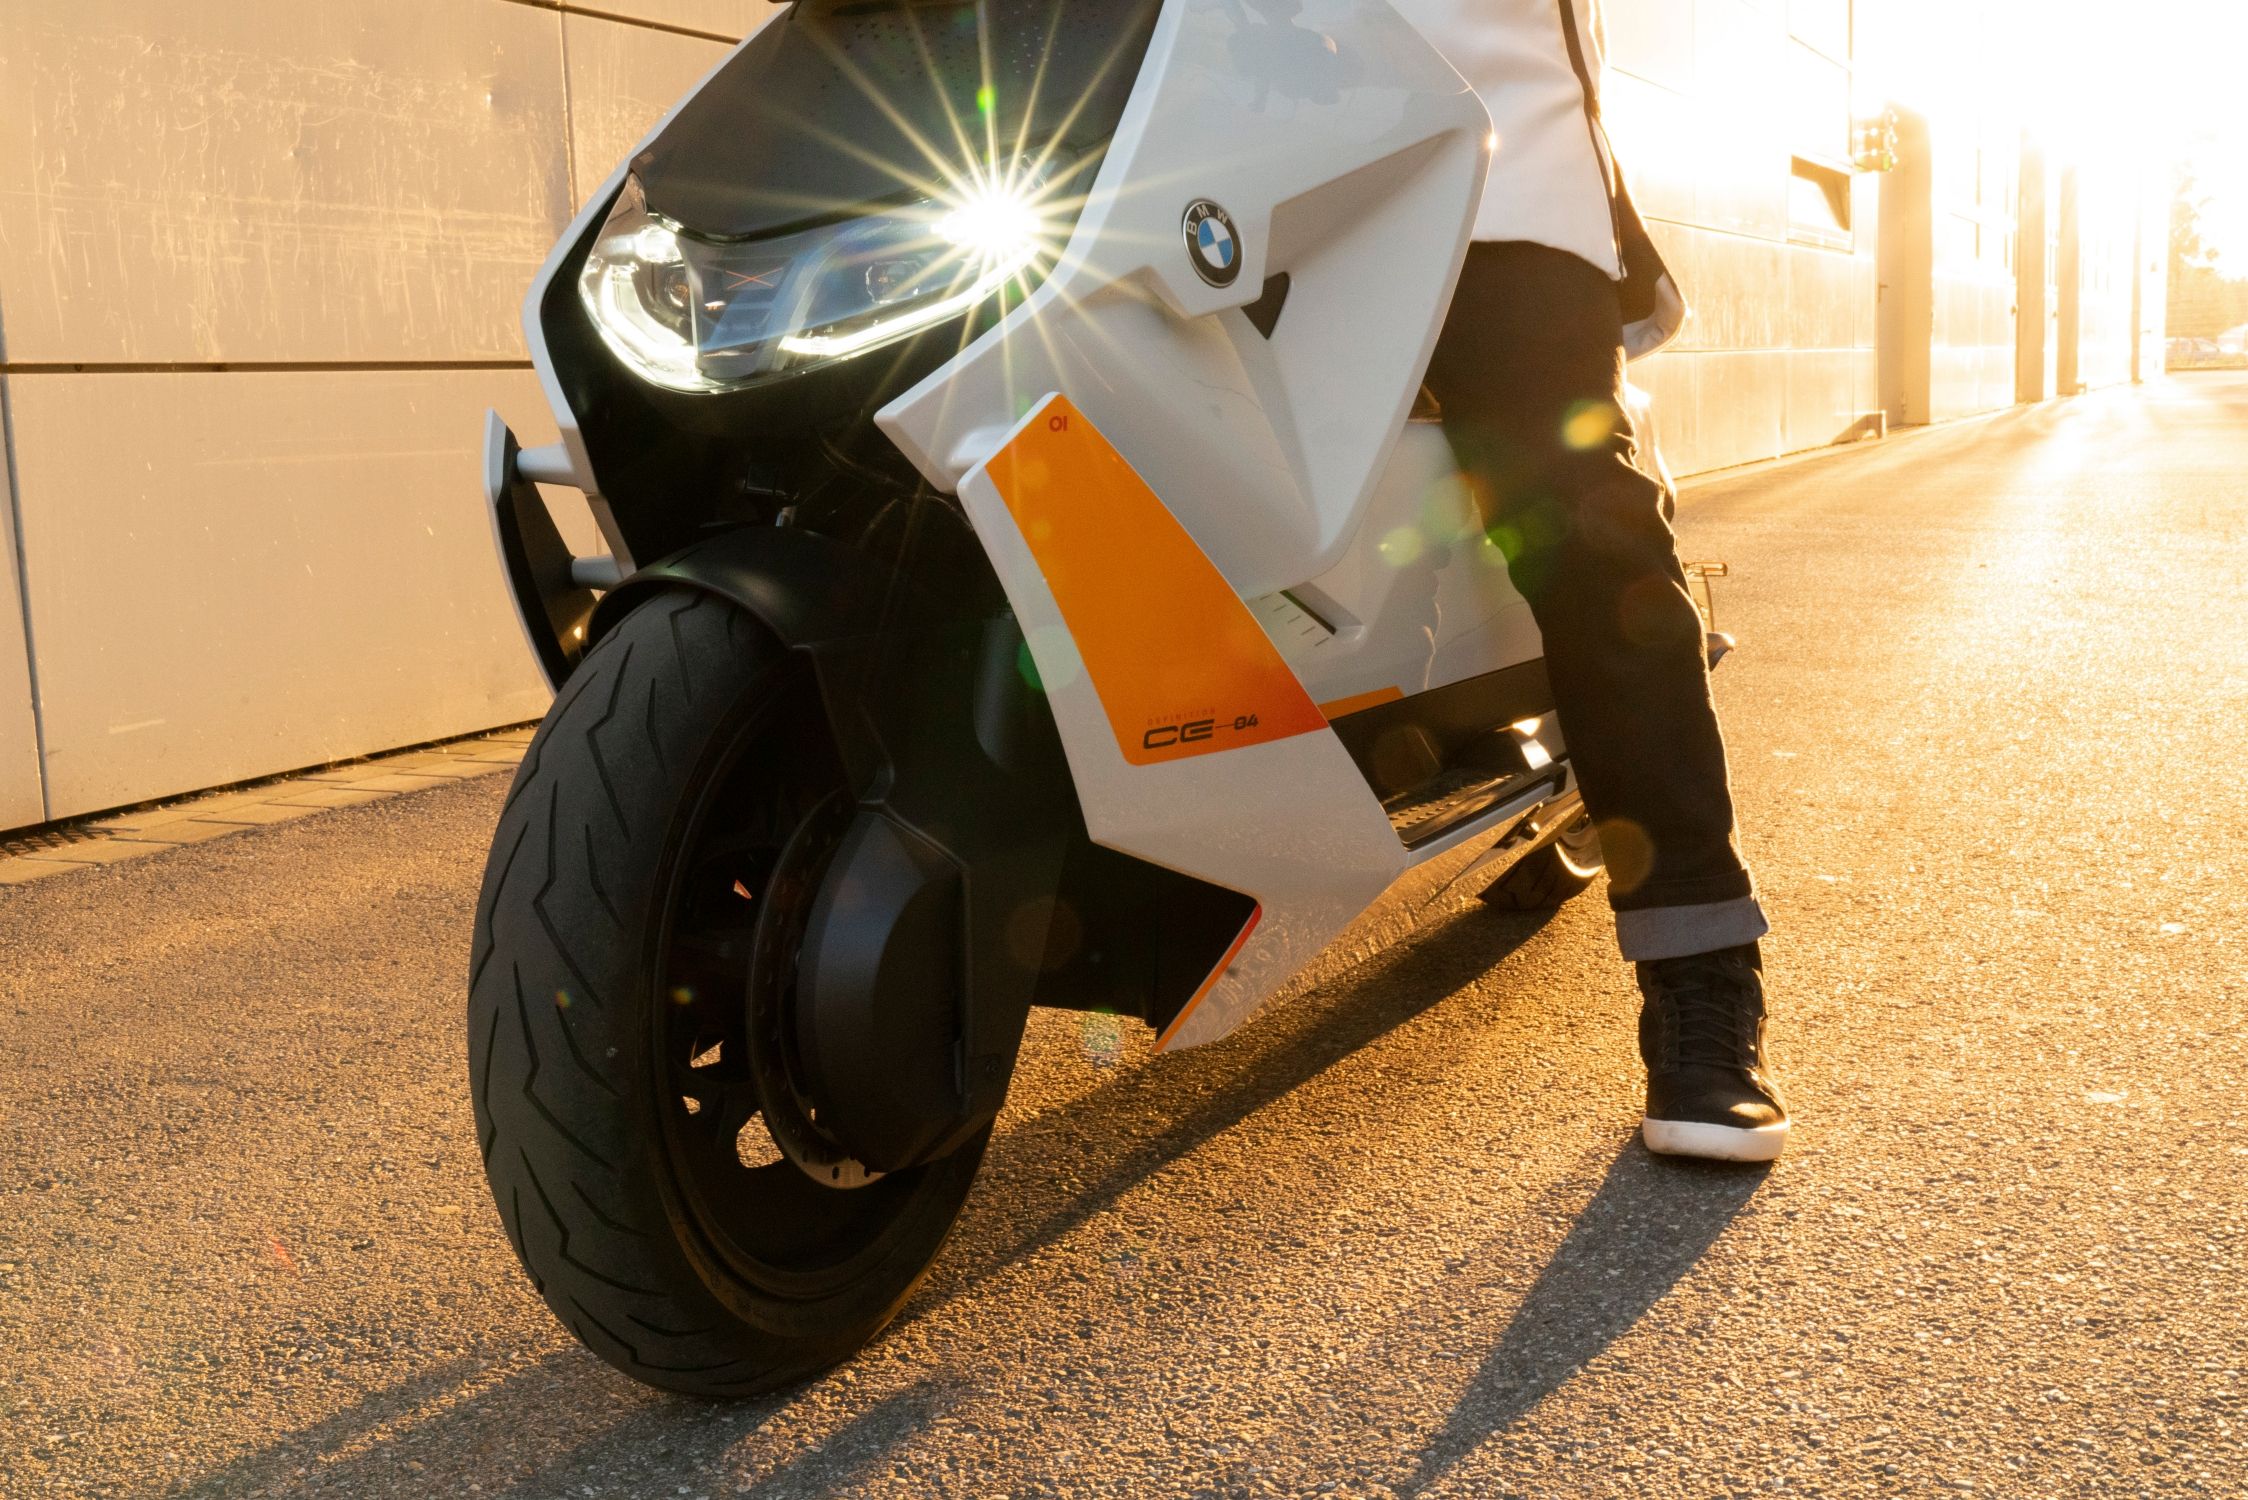 BMW Motorrad Definition CE 04 – The Urban Mobility of the Future